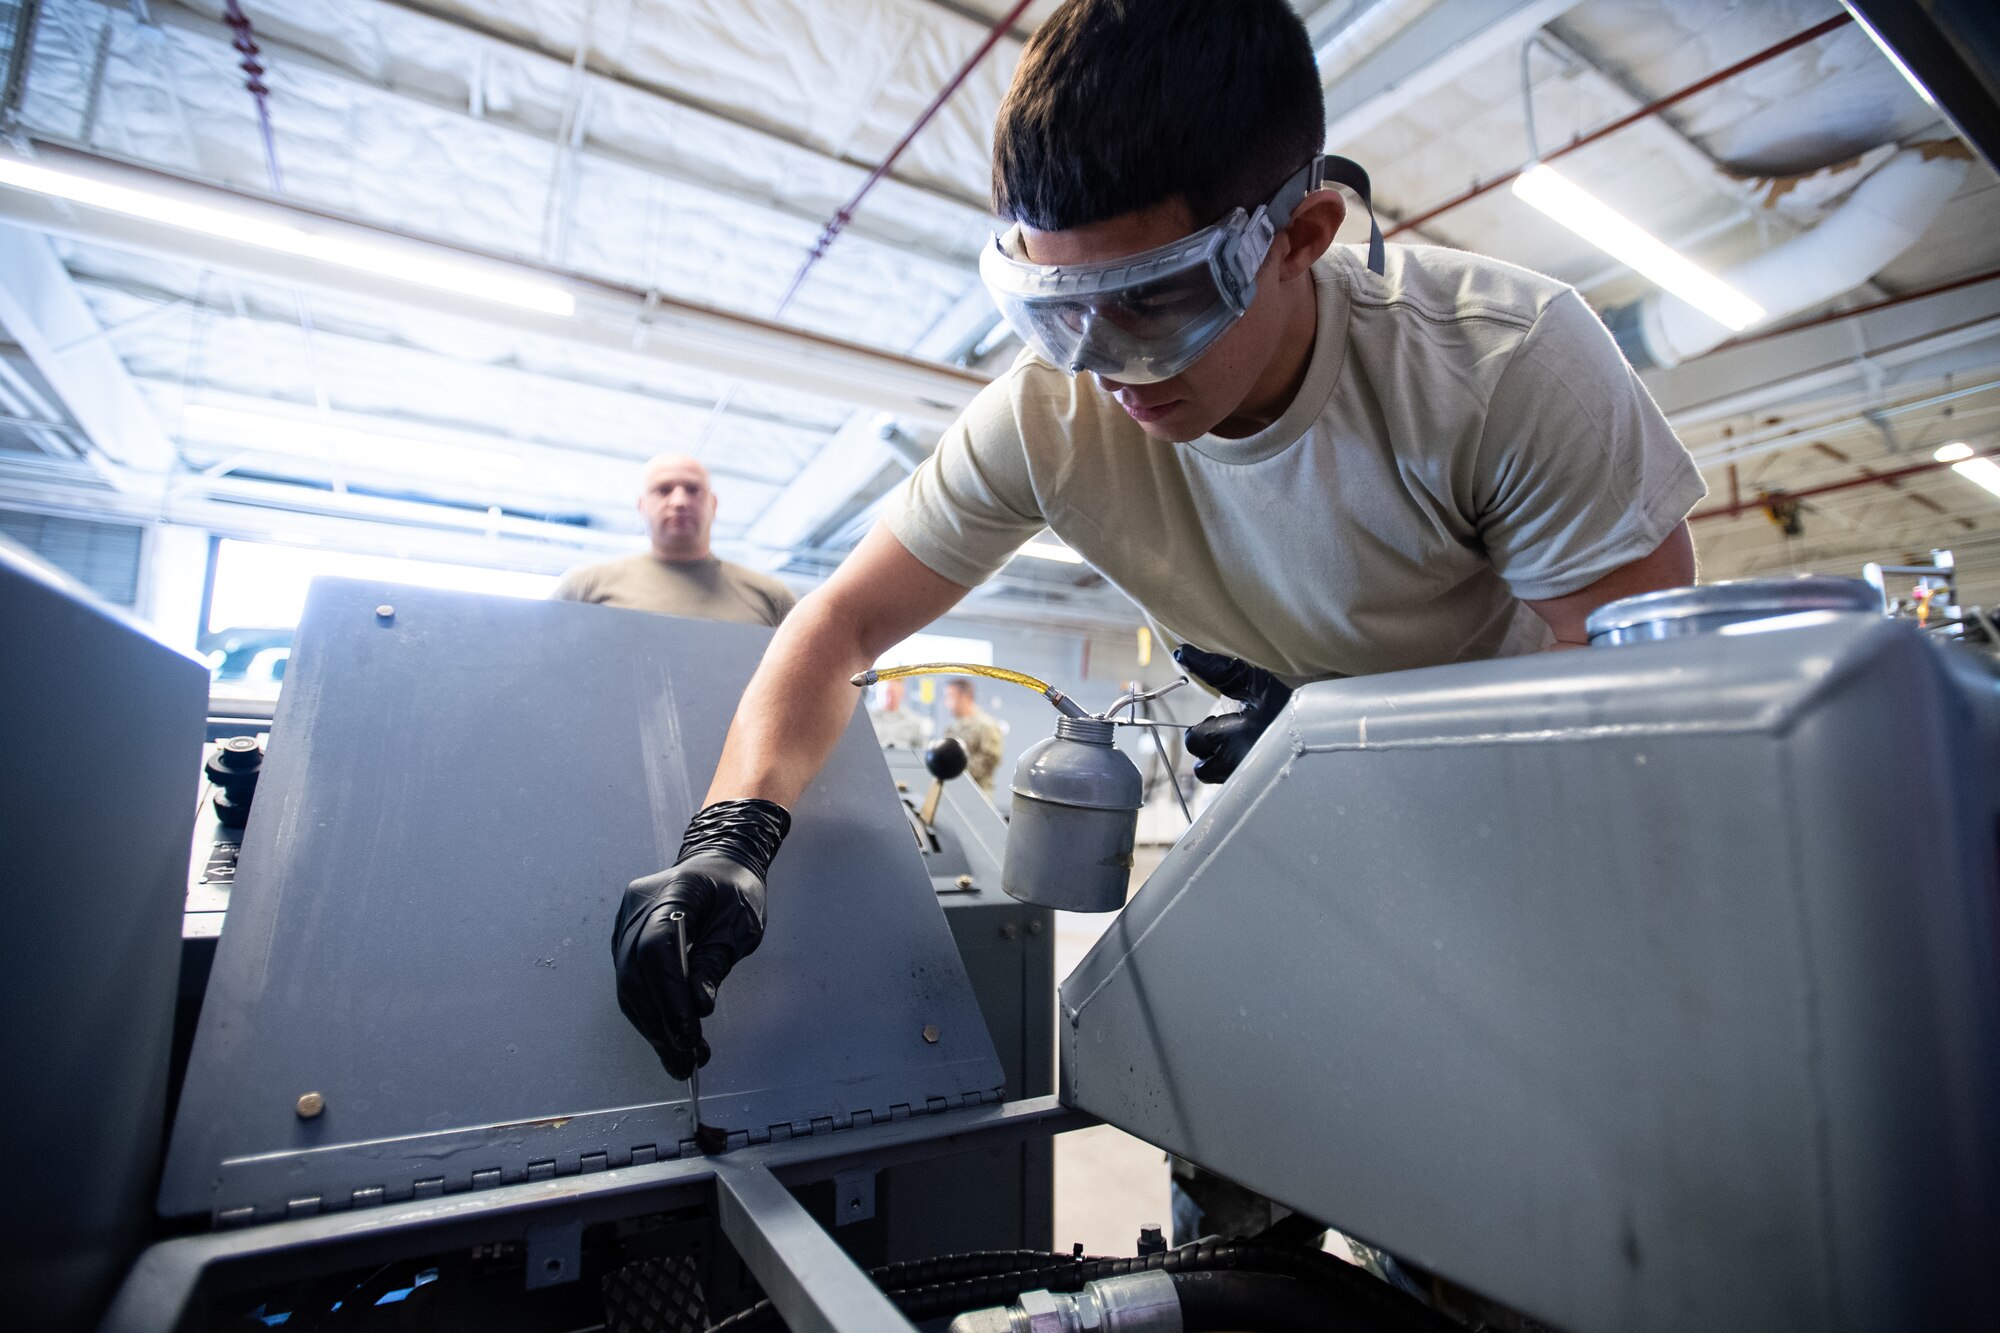 Airman 1st Class Javier Saldana, 388th Aerospace Ground Equipment Flight, performs maintenance on a munitions loader at Hill Air Force Base, Utah, Oct. 4, 2019. Unit Airmen maintain over 600 pieces of equipment that support the mission of crew chiefs, avionics, weapons and ammo troops. (U.S. Air Force photo by R. Nial Bradshaw)